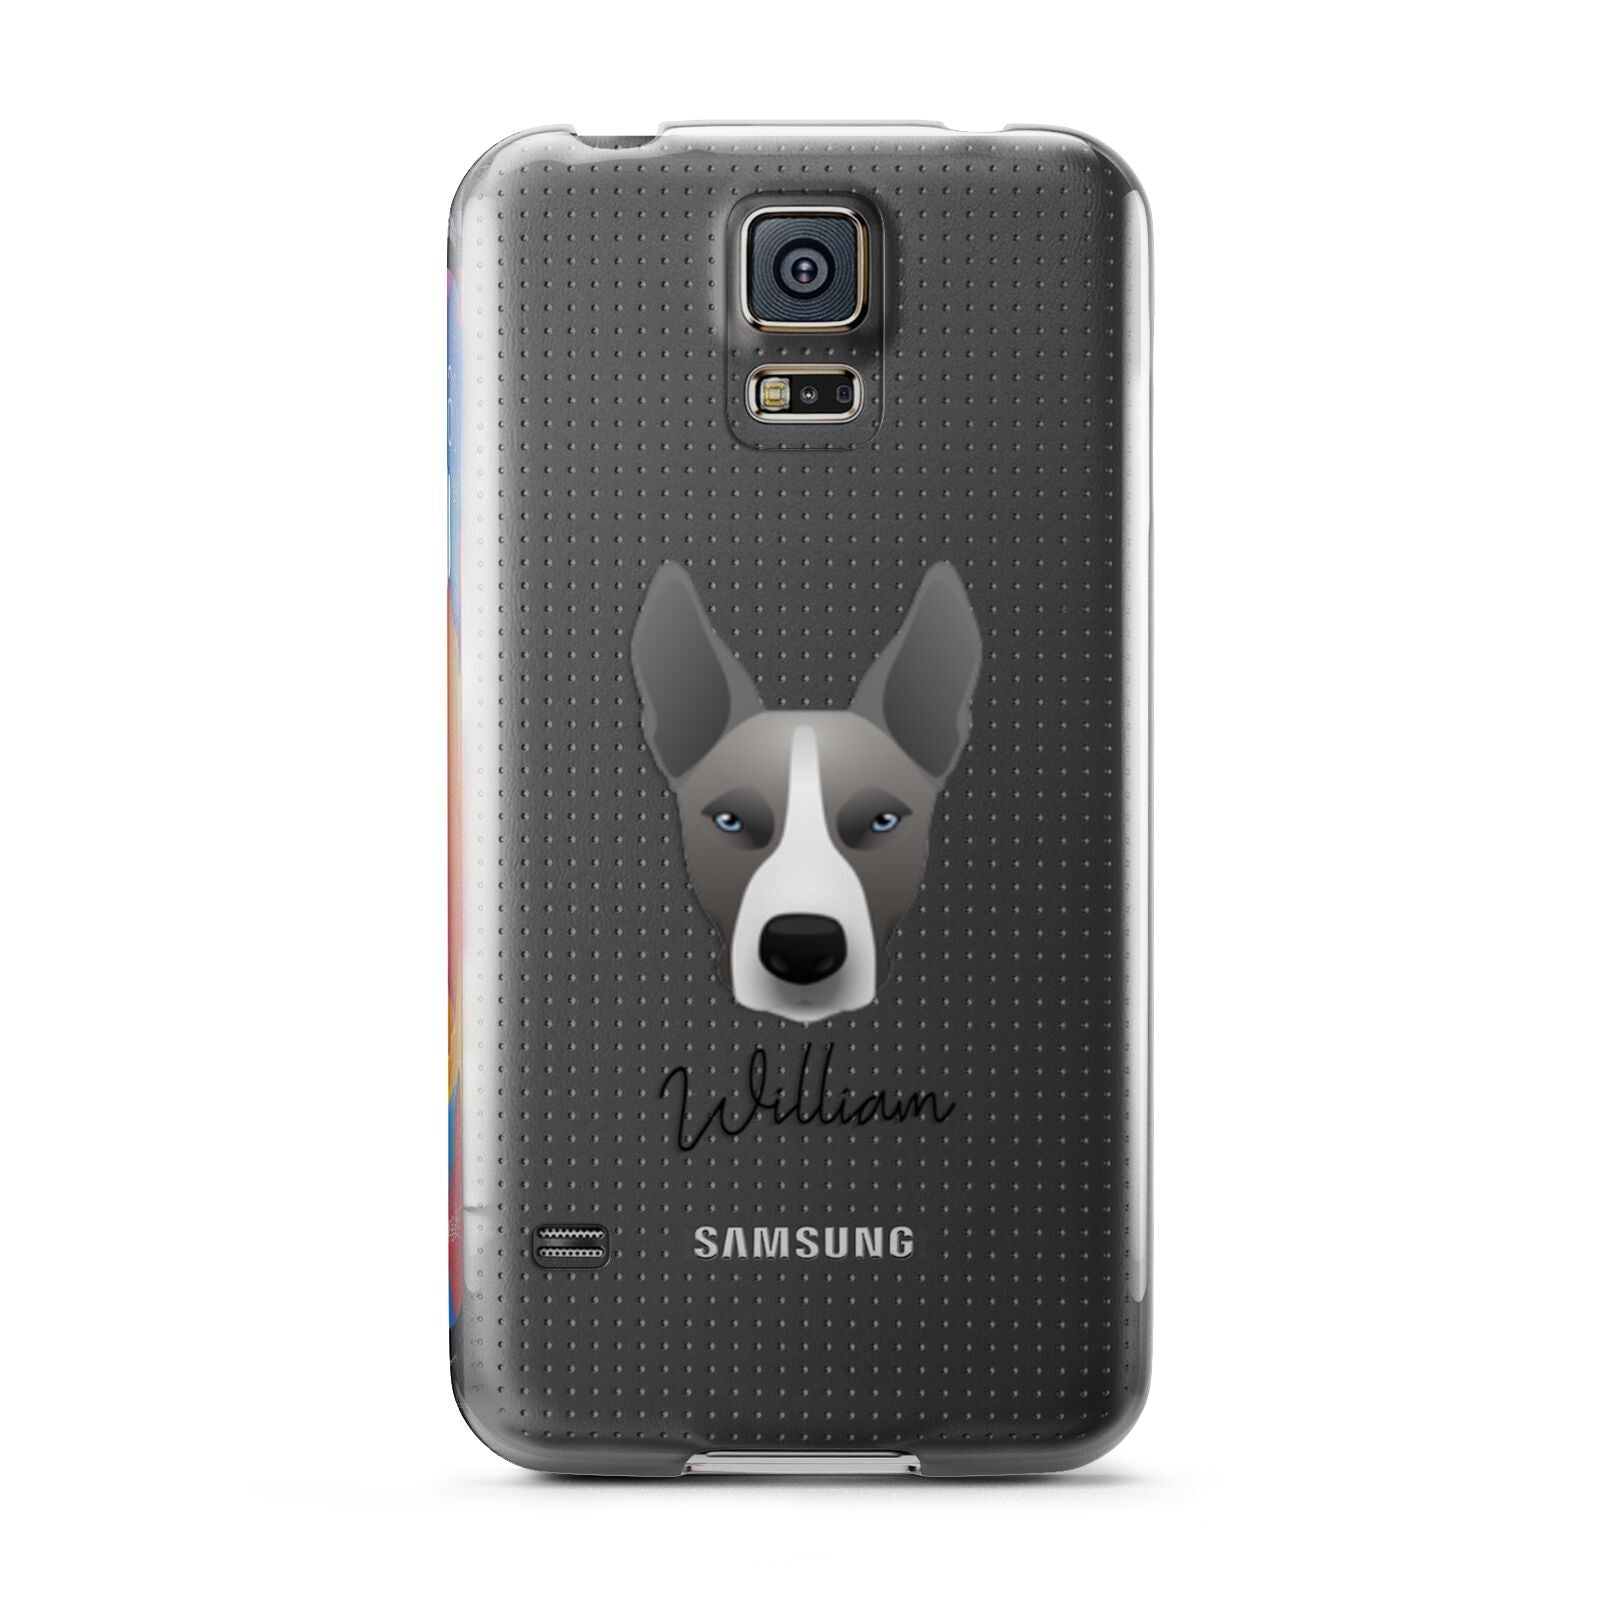 Pitsky Personalised Samsung Galaxy S5 Case